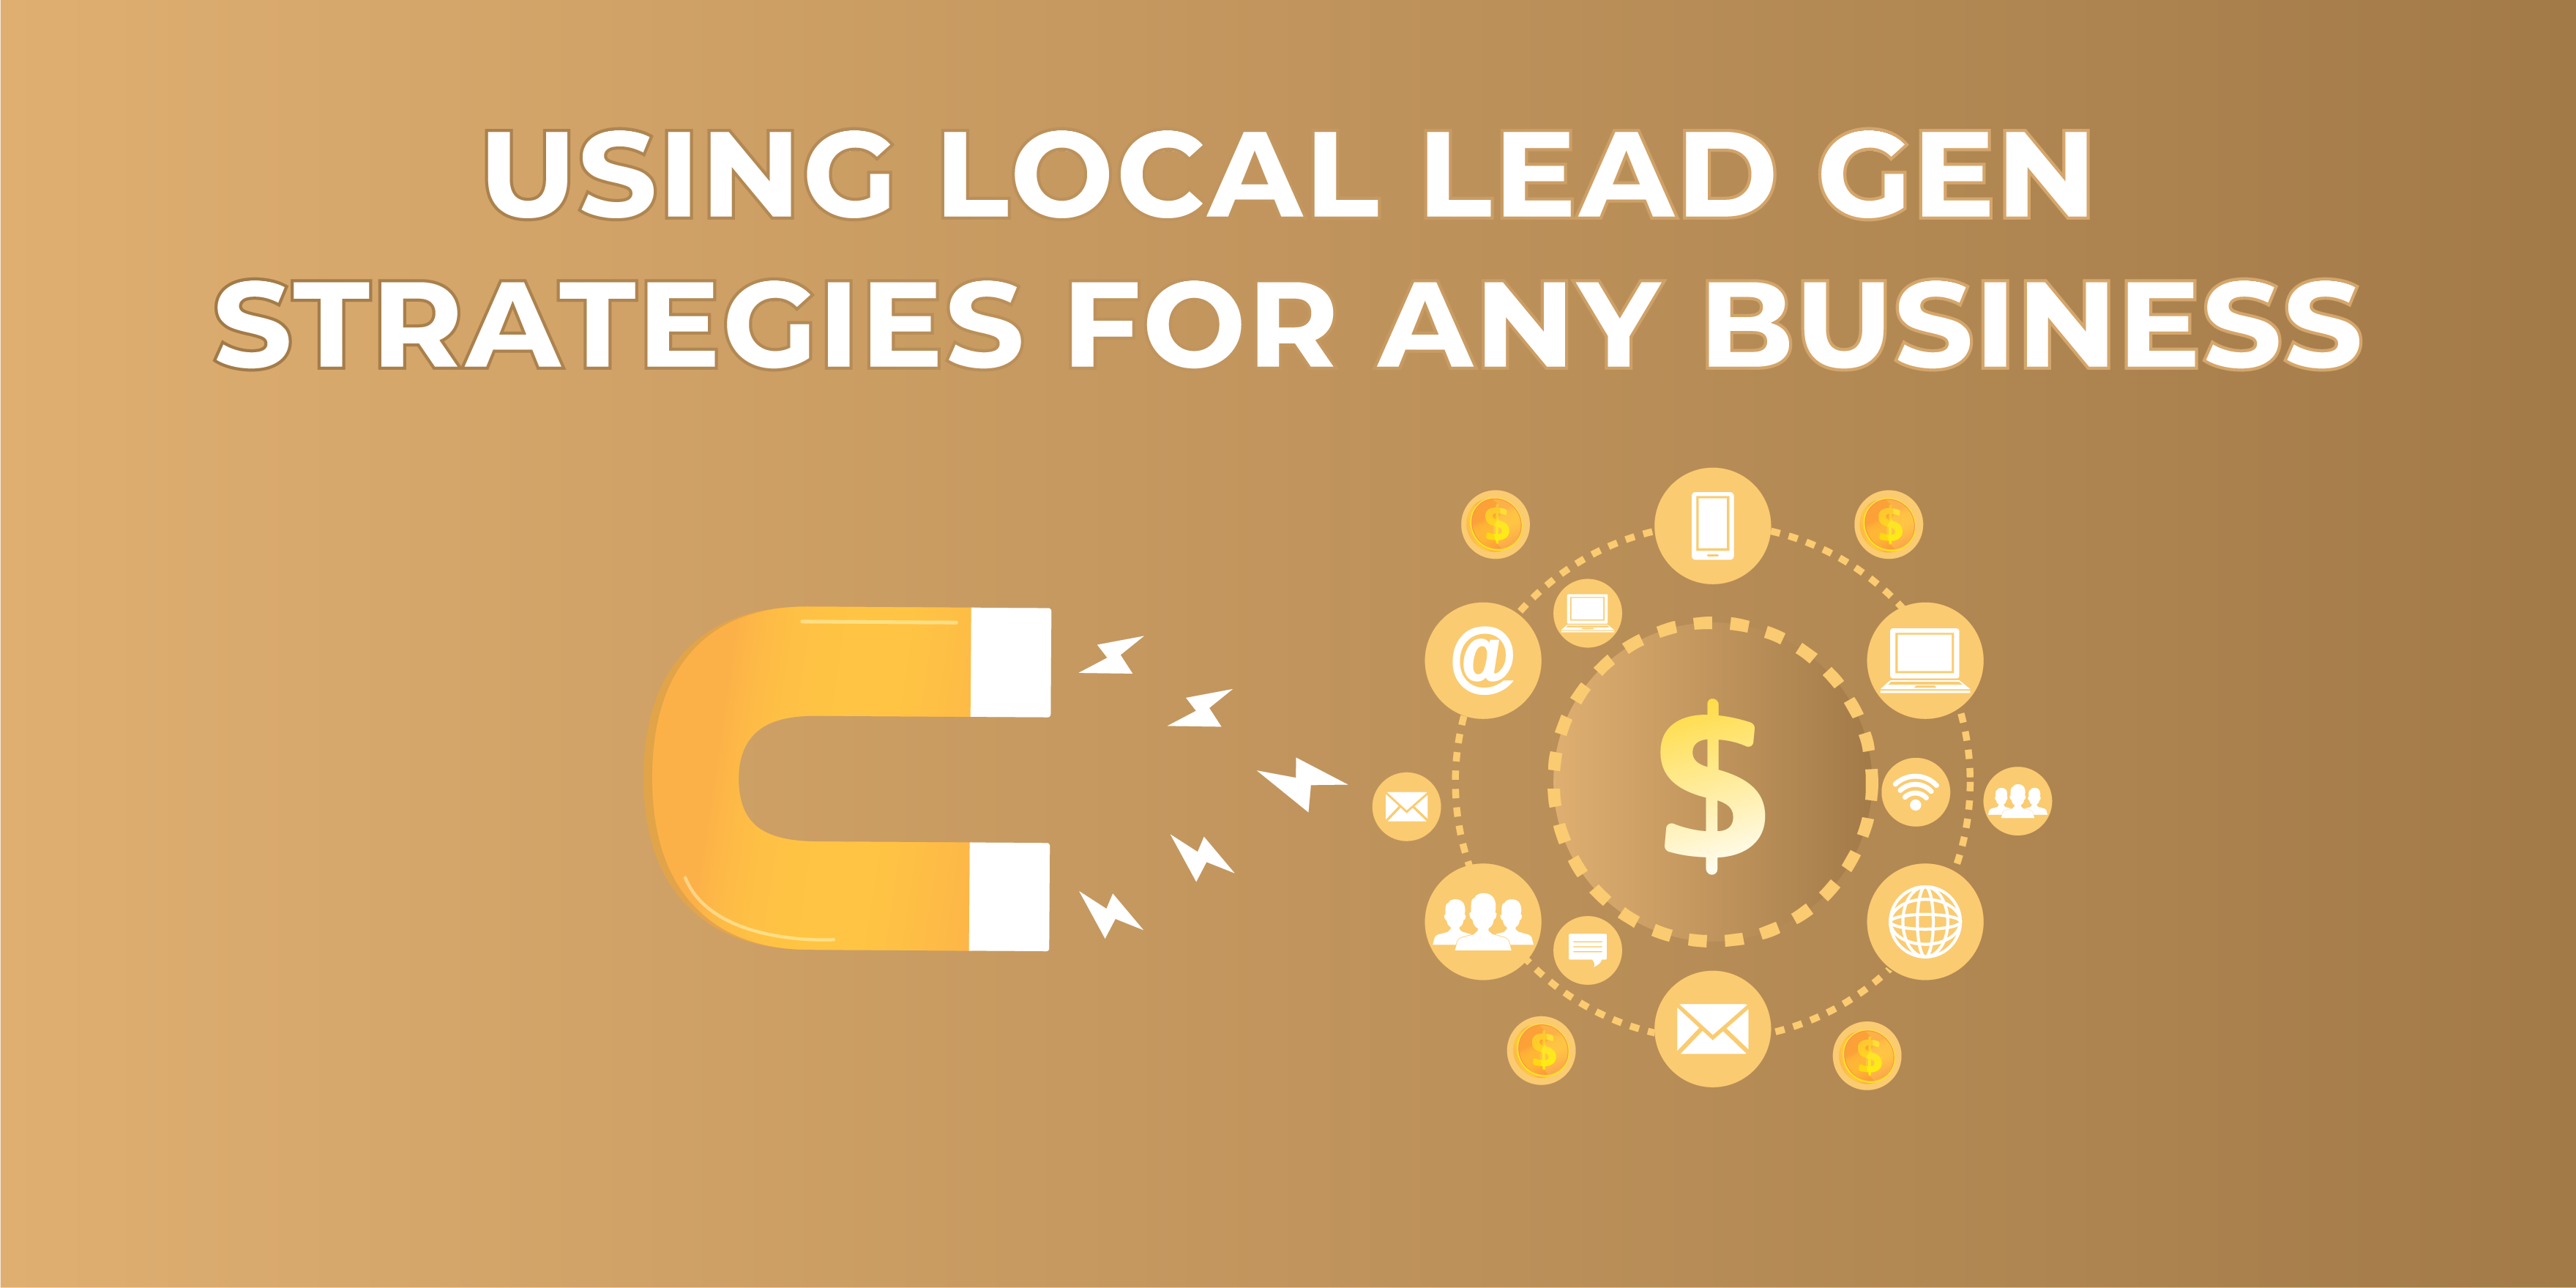 5- using local lead gen strategies for any business - damianmartinez.com blog